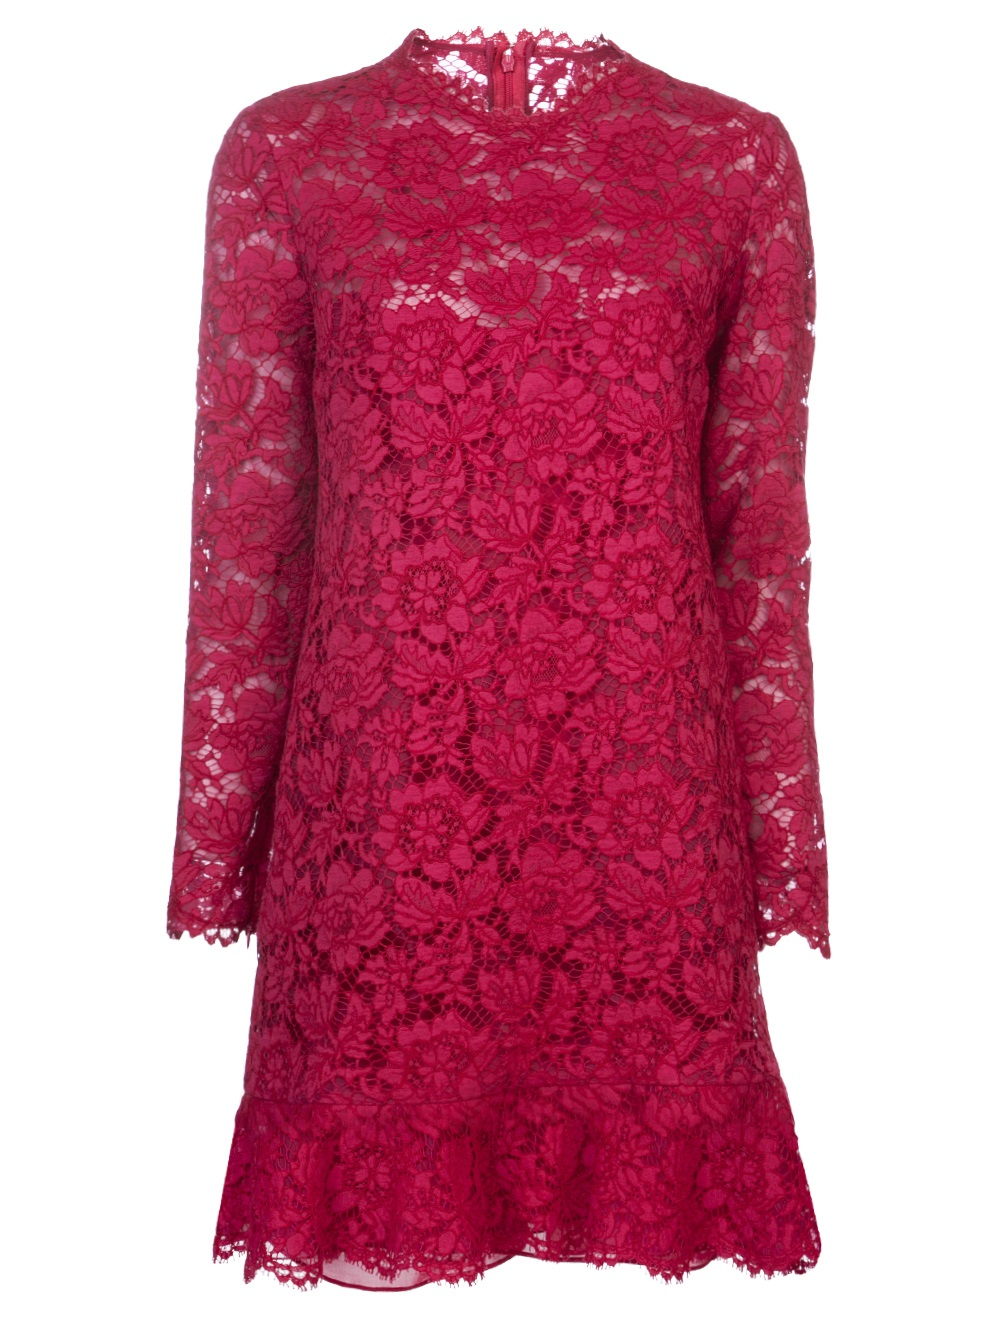 Lyst - Valentino Ruffled Lace Dress in Red